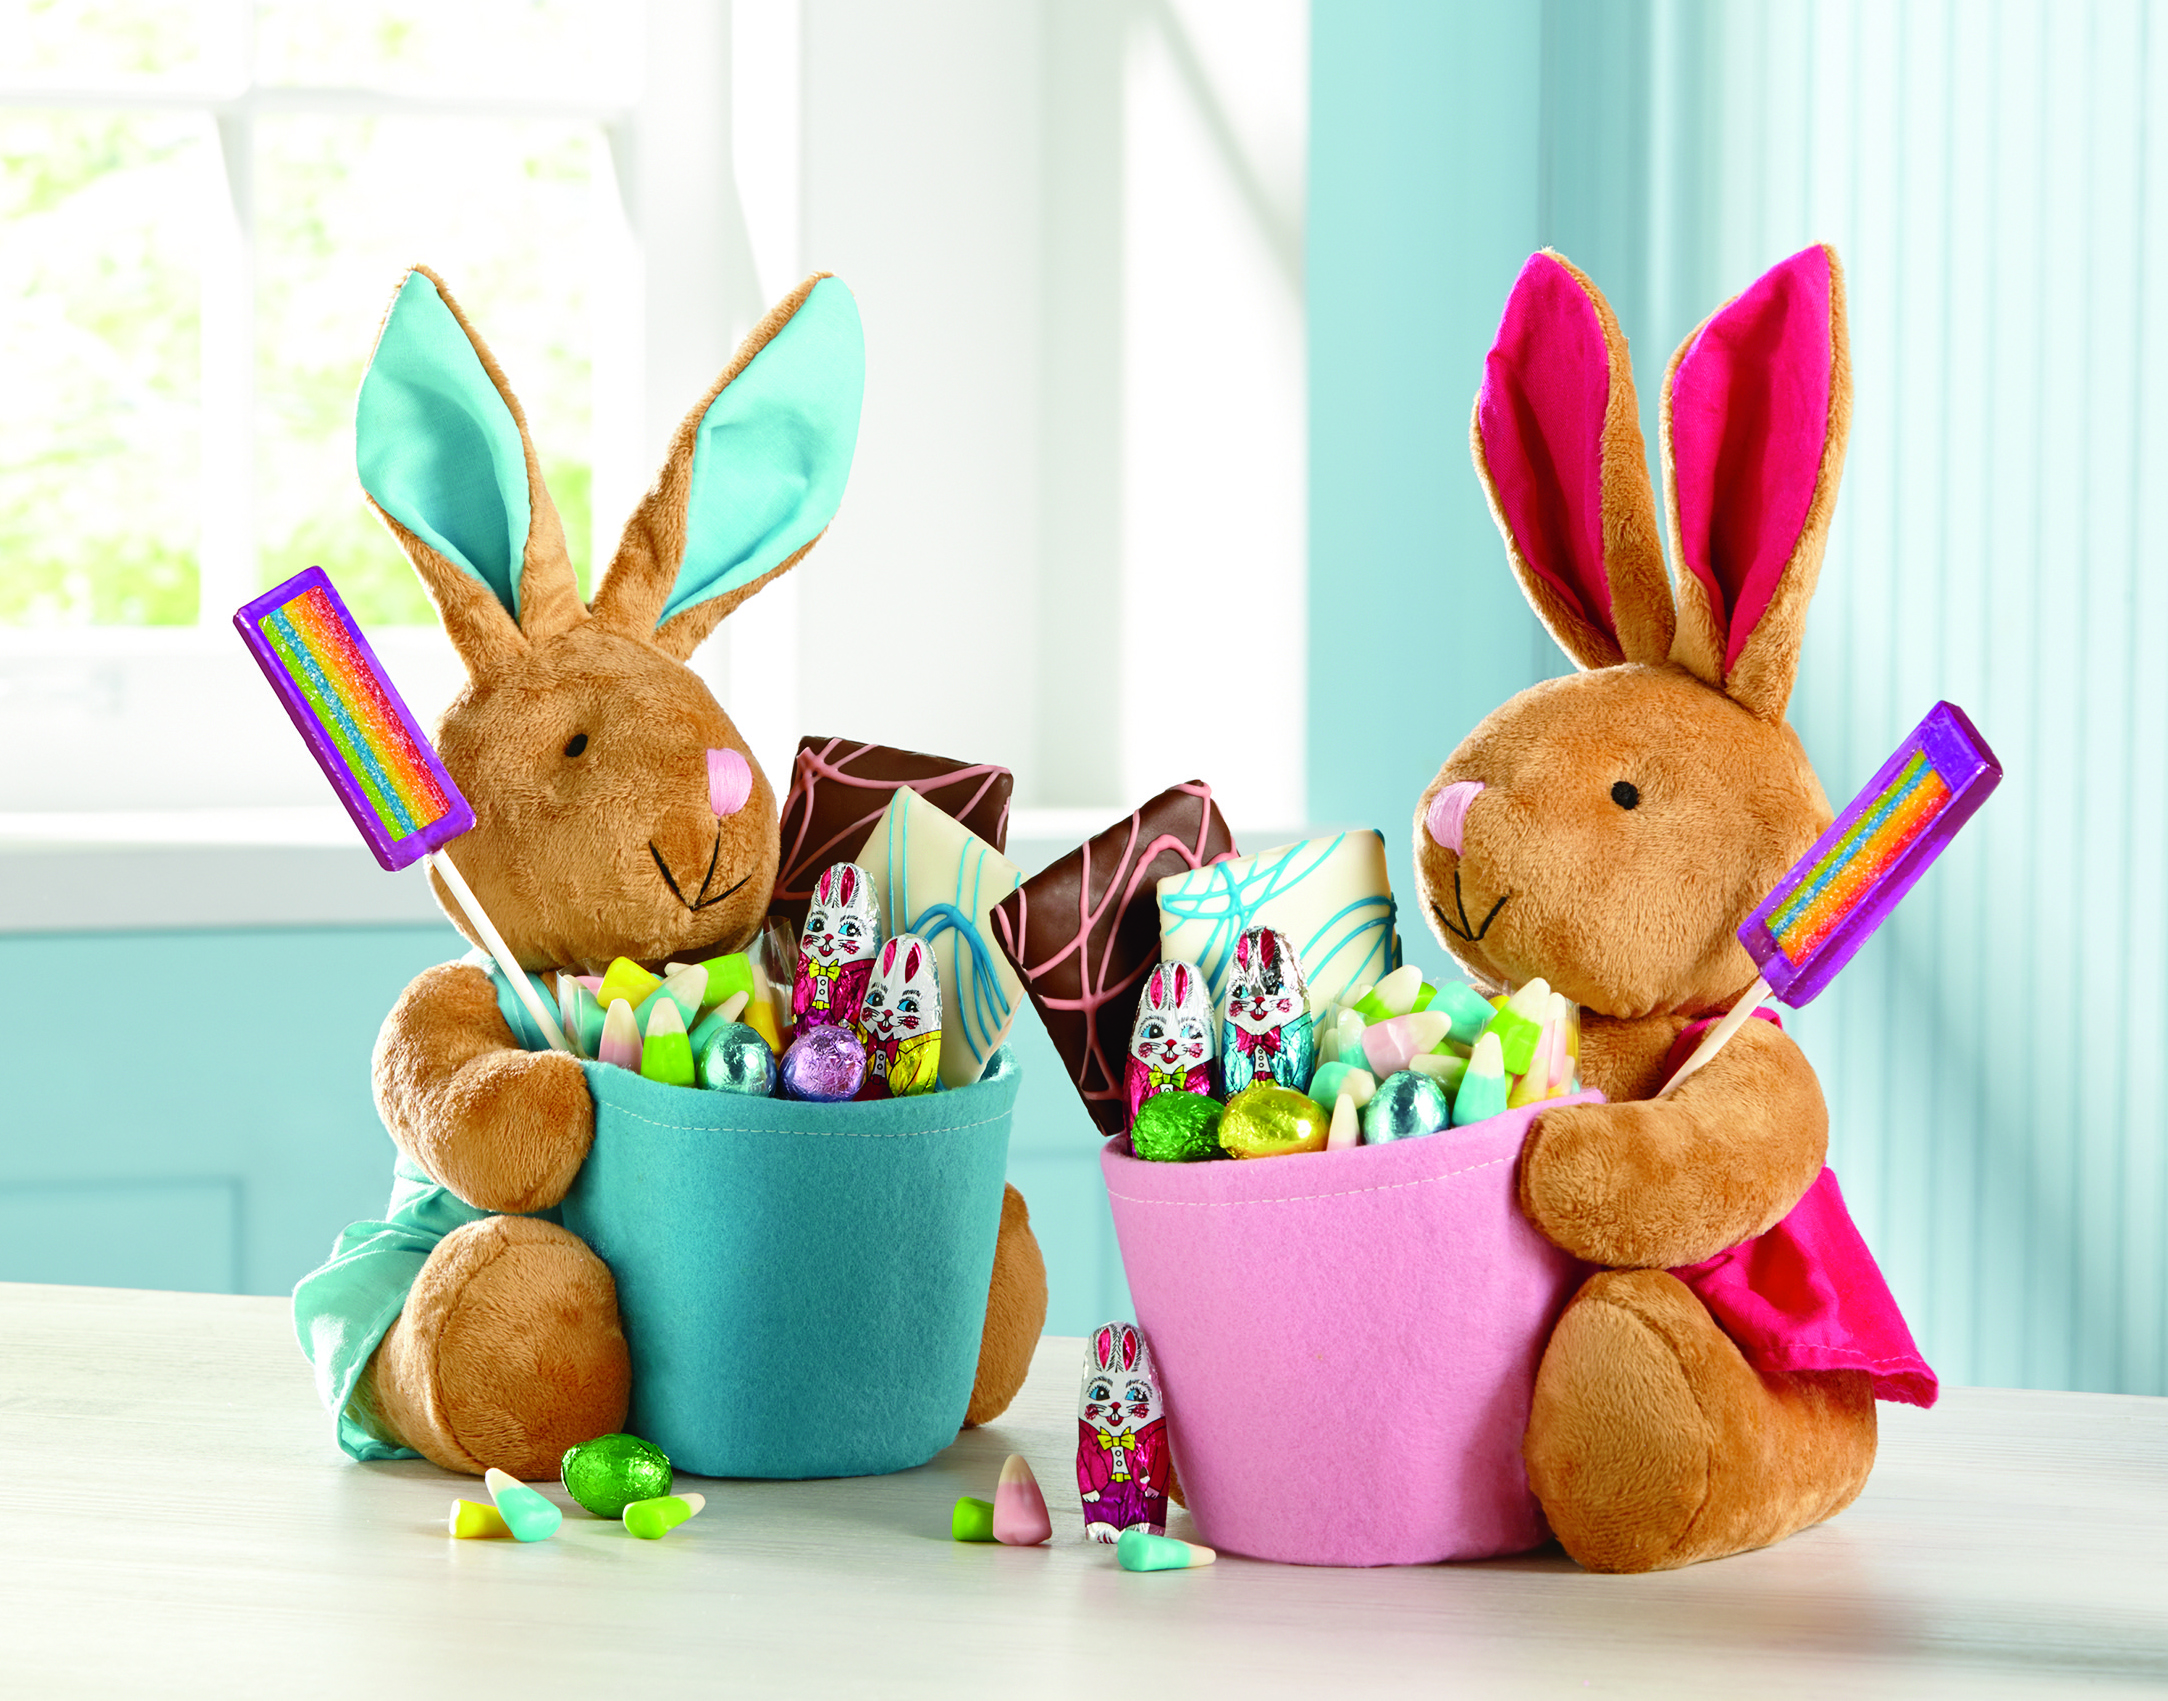 Happy Easter Celebration Baskets Delight Kids Pink And Blue Bunny From The Swiss Colony